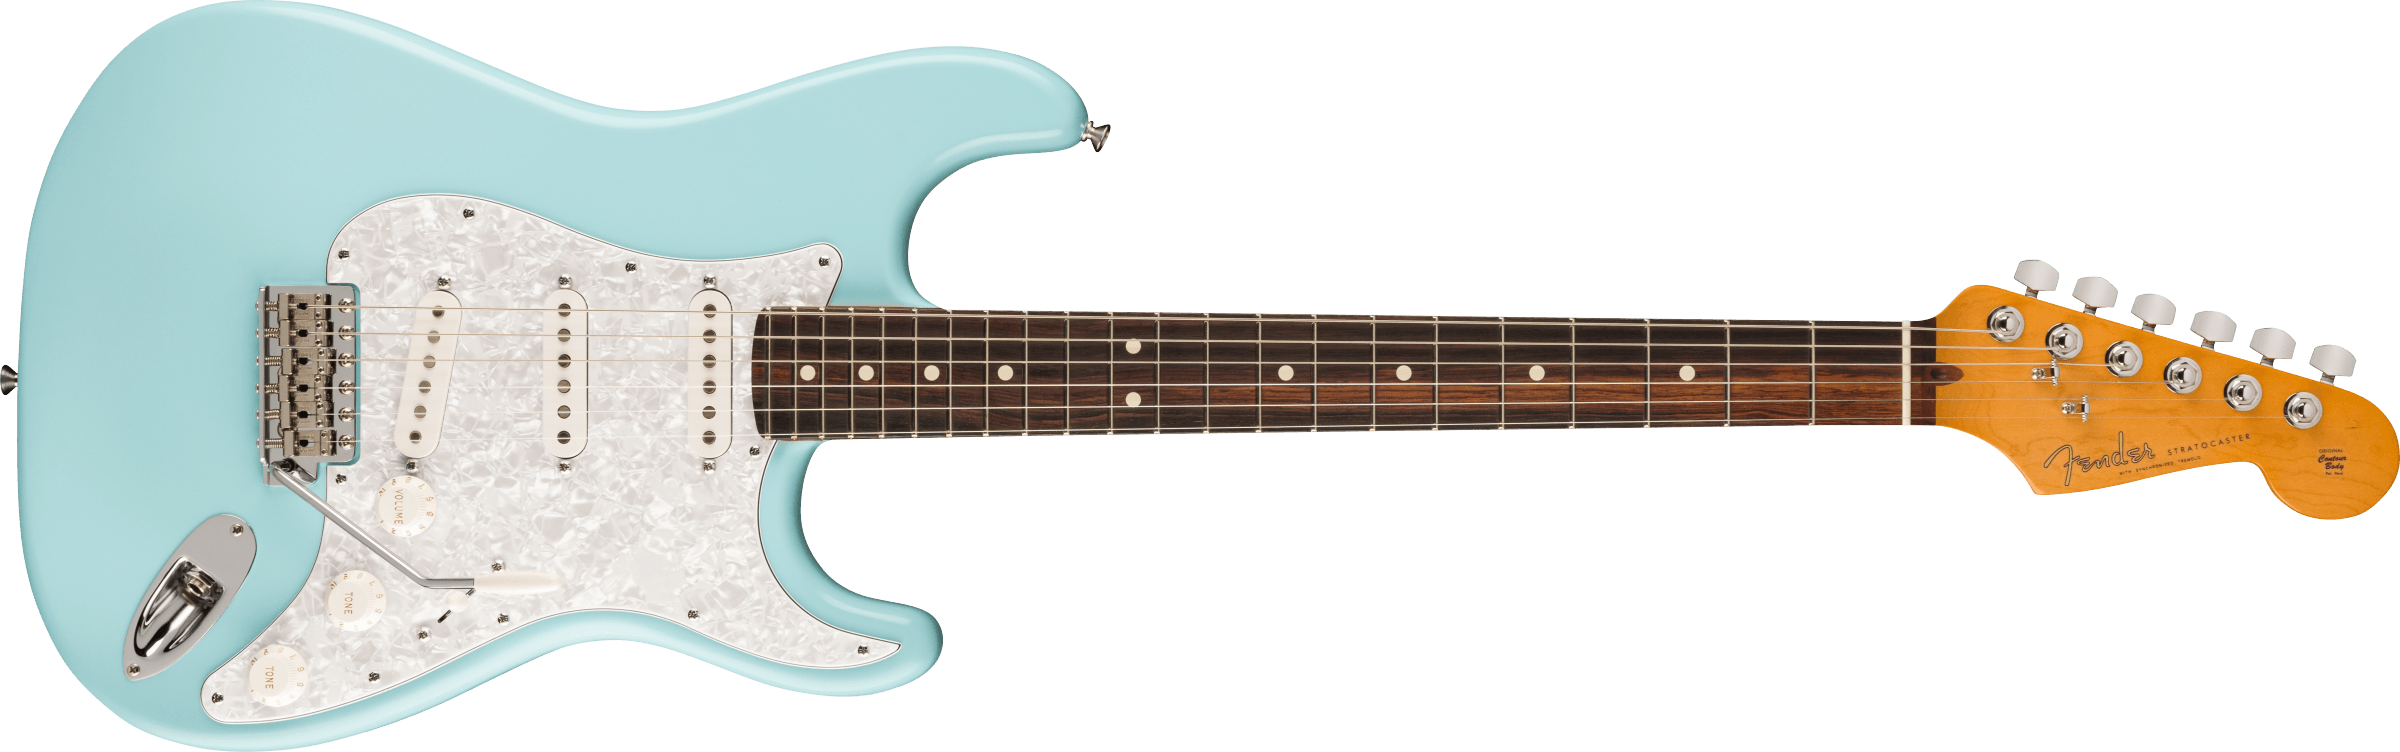 FENDER Limited Edition Cory Wong Stratocaster Rosewood Fingerboard, Daphne Blue 0115010704